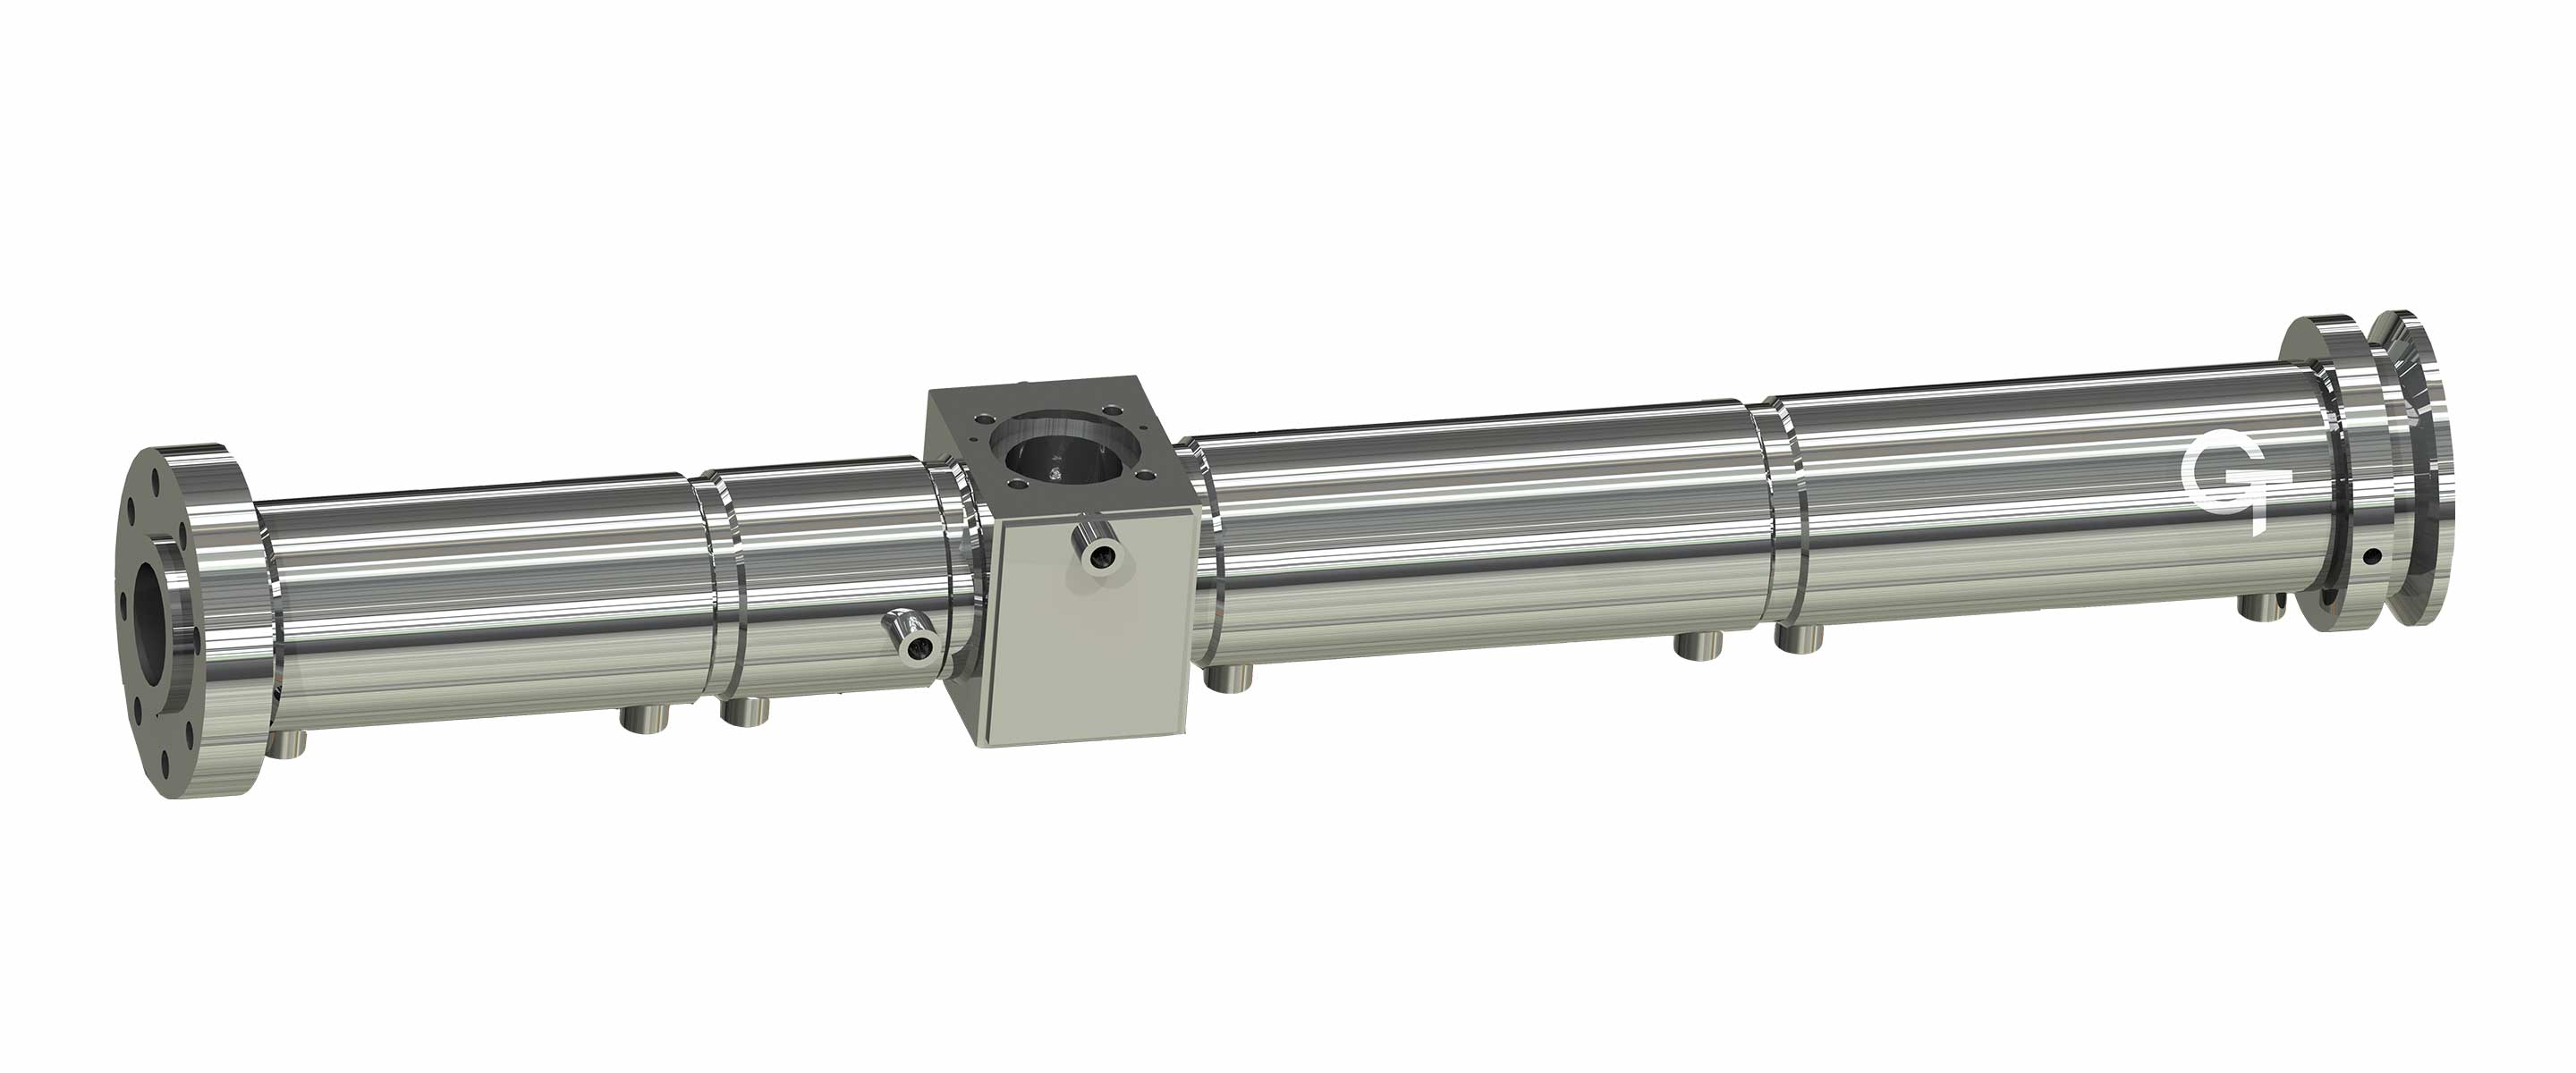 The extrusion barrel is produced of nitrided steel or bimetal.